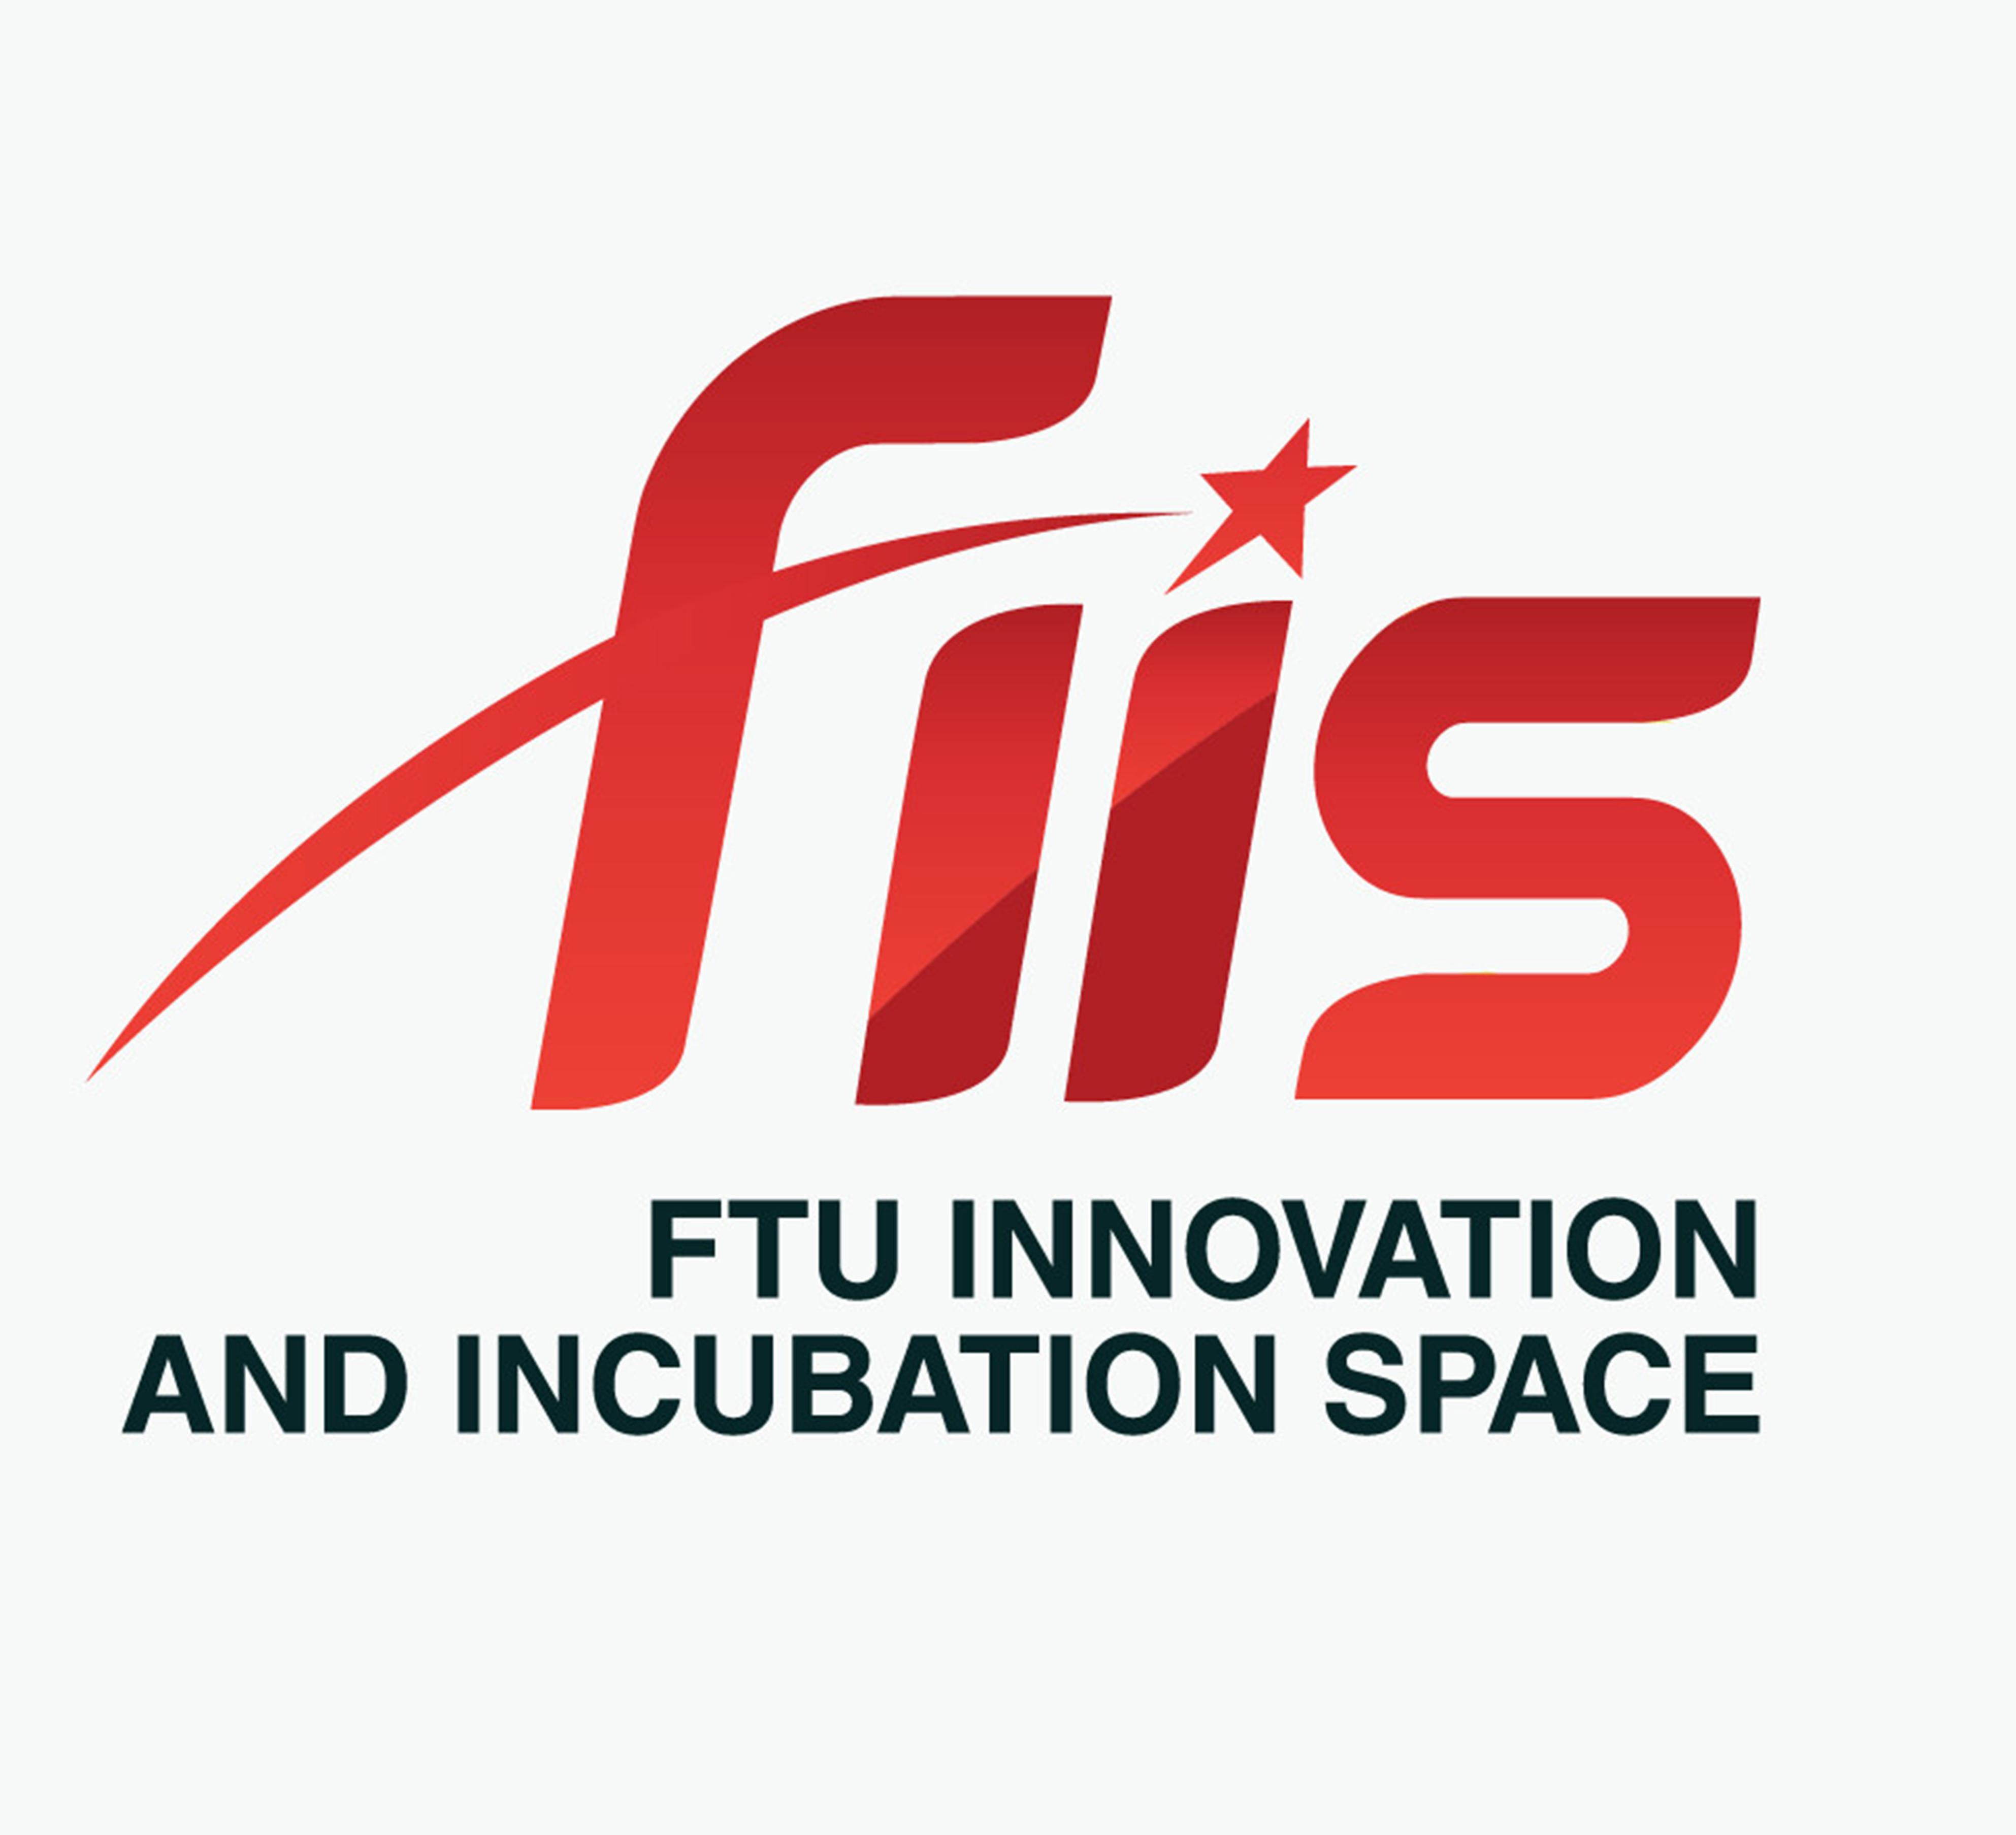 FTU INNOVATION AND INCUBATION SPACE